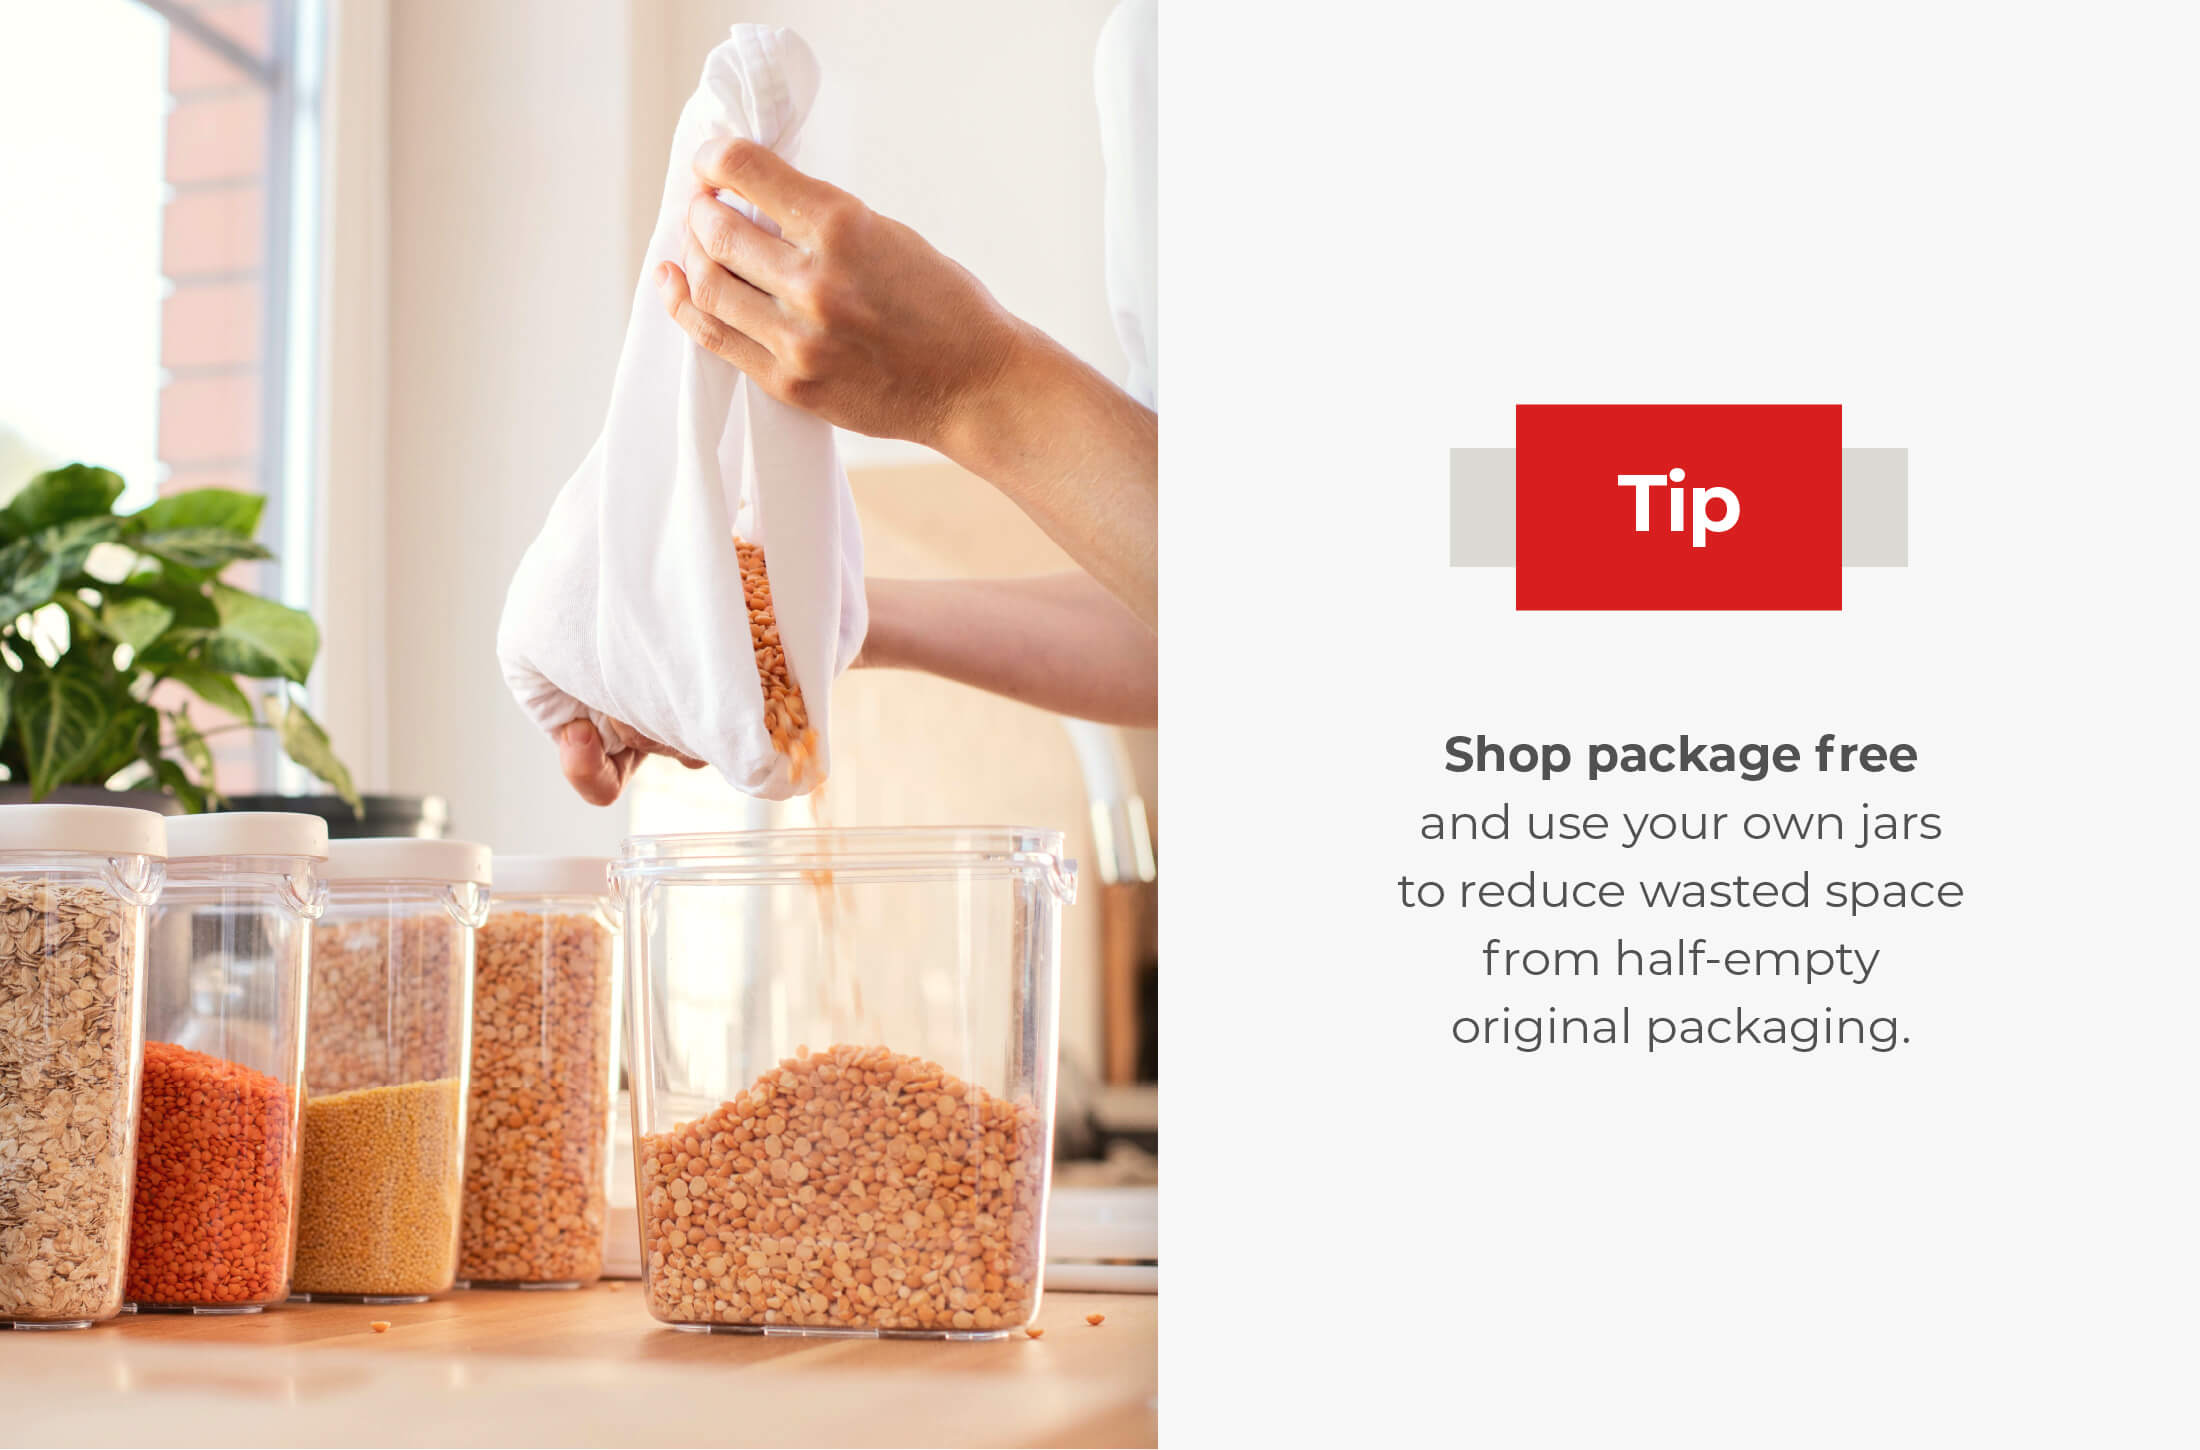 Shop package free and use your own jars to reduce wasted space from half-empty original packaging.